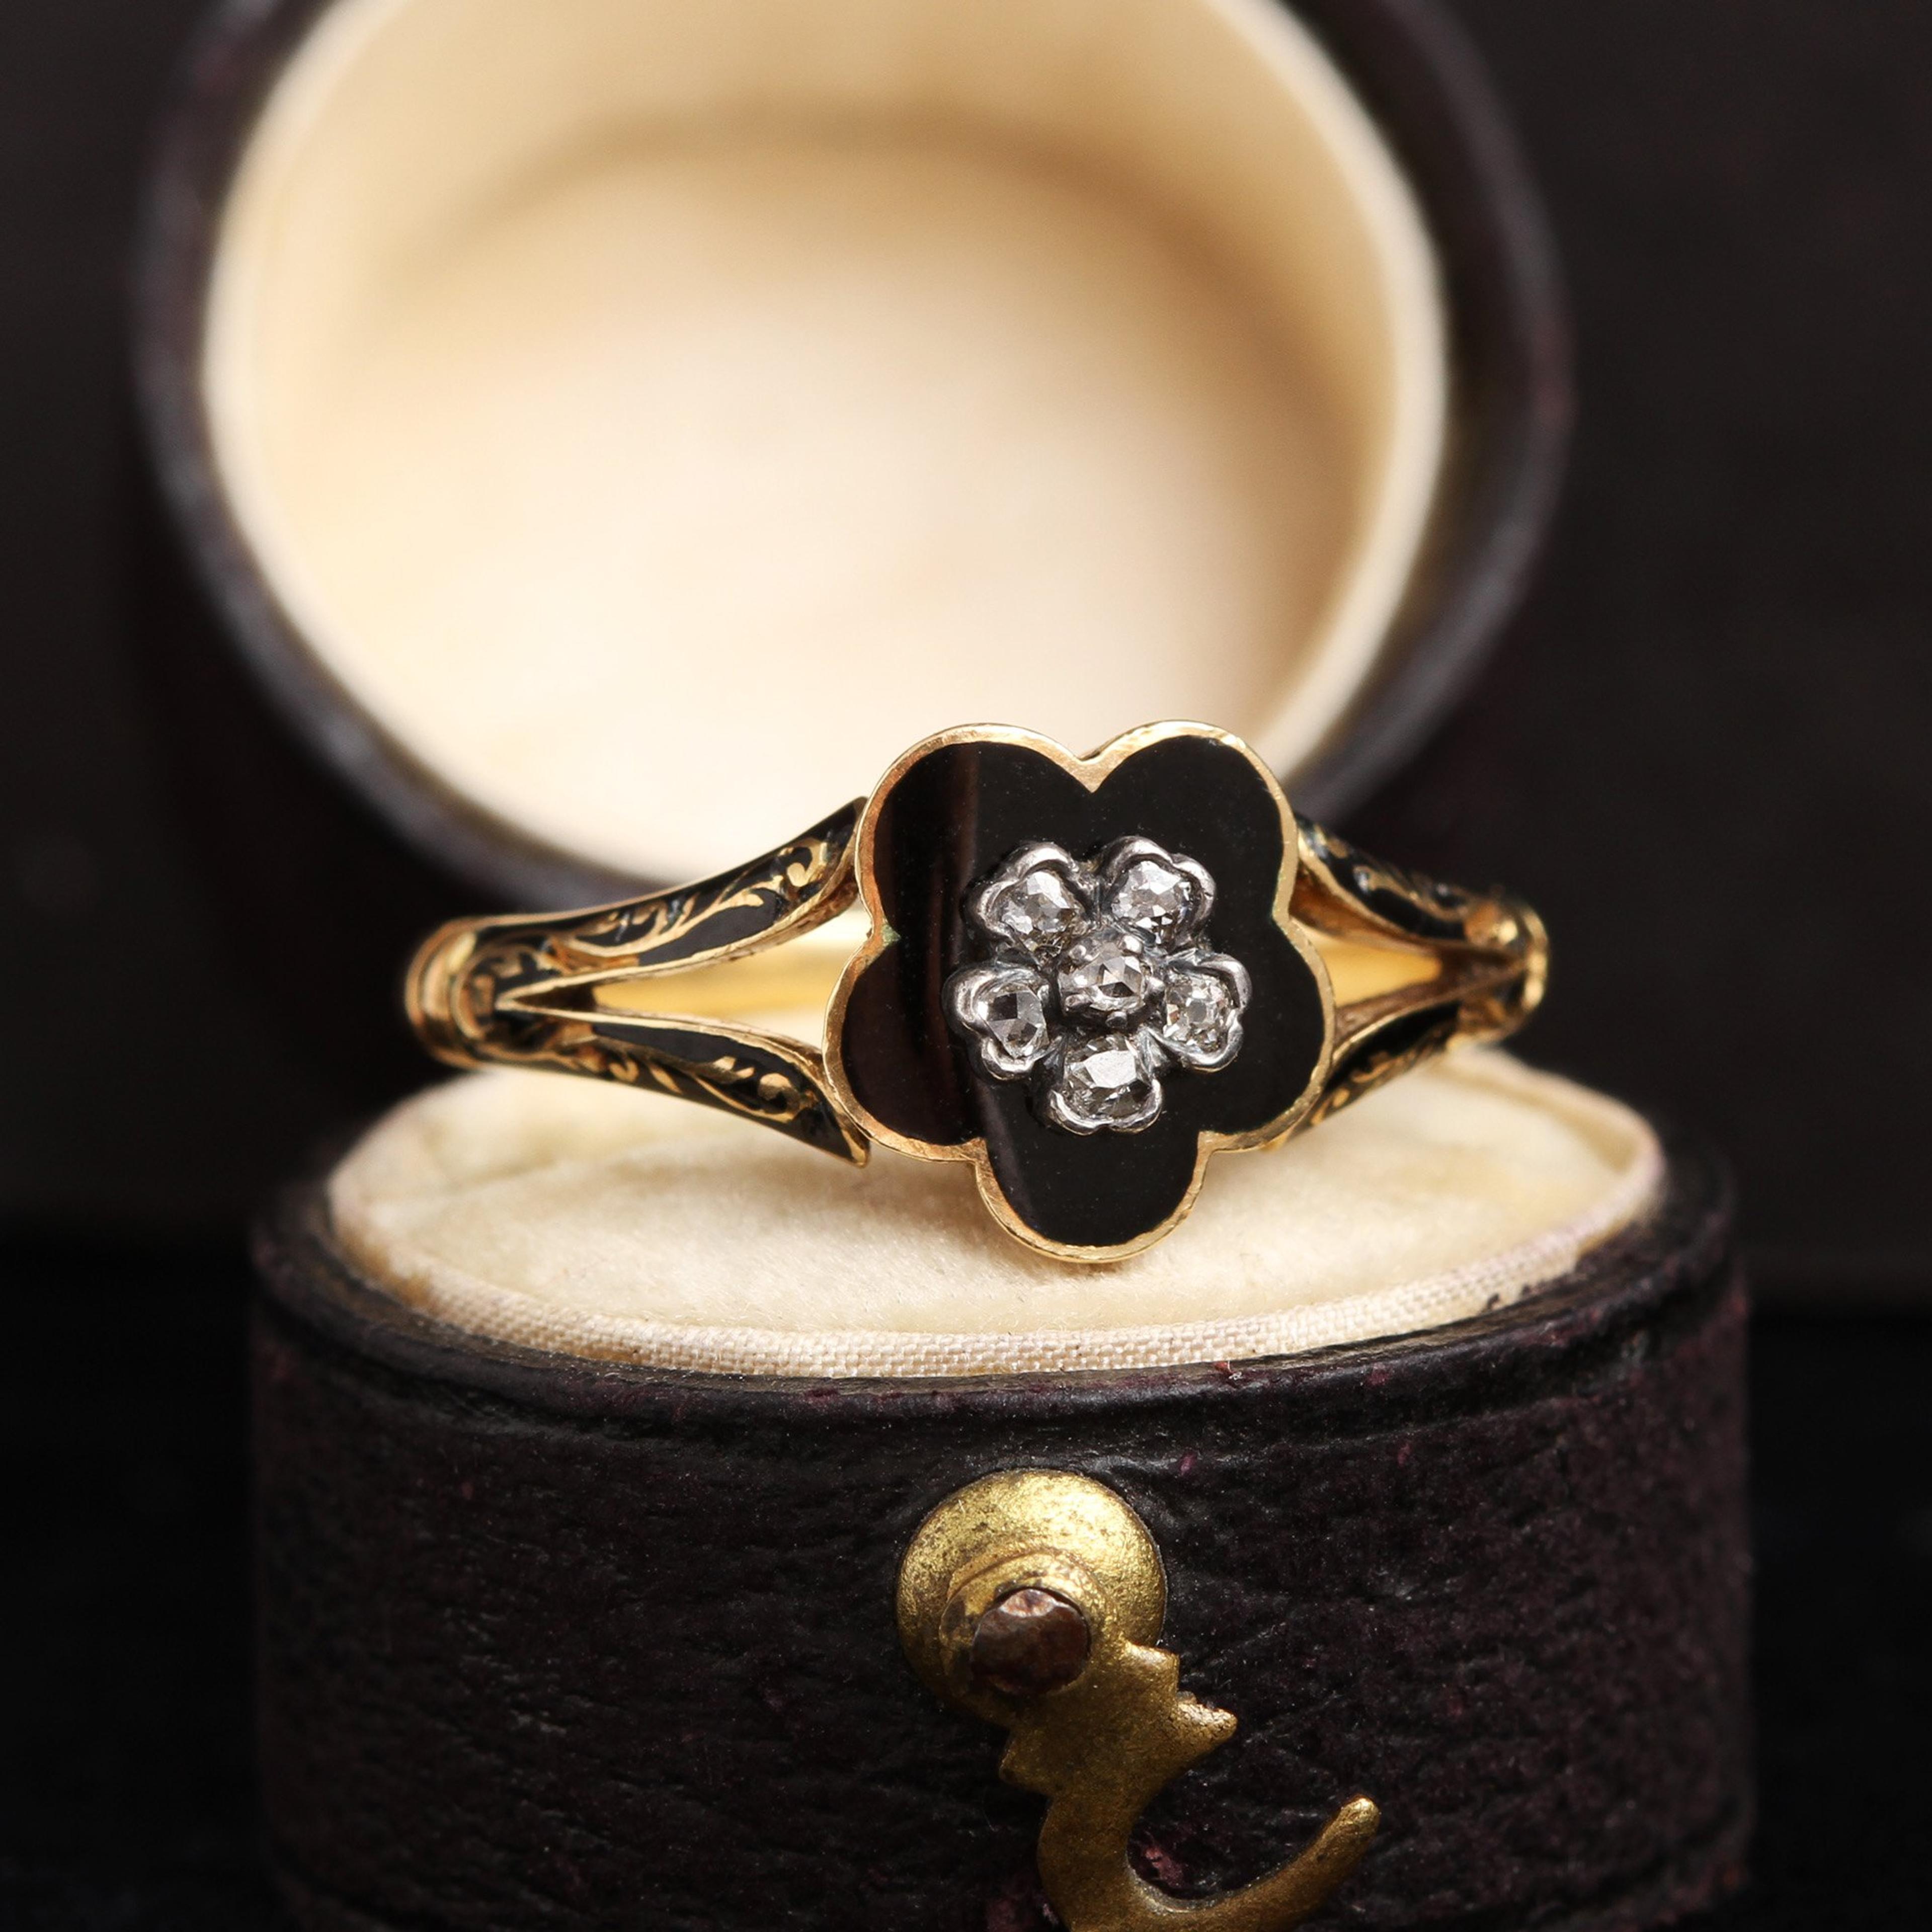 Face detail of Early Victorian Diamond and Enamel Pansy Mourning Ring